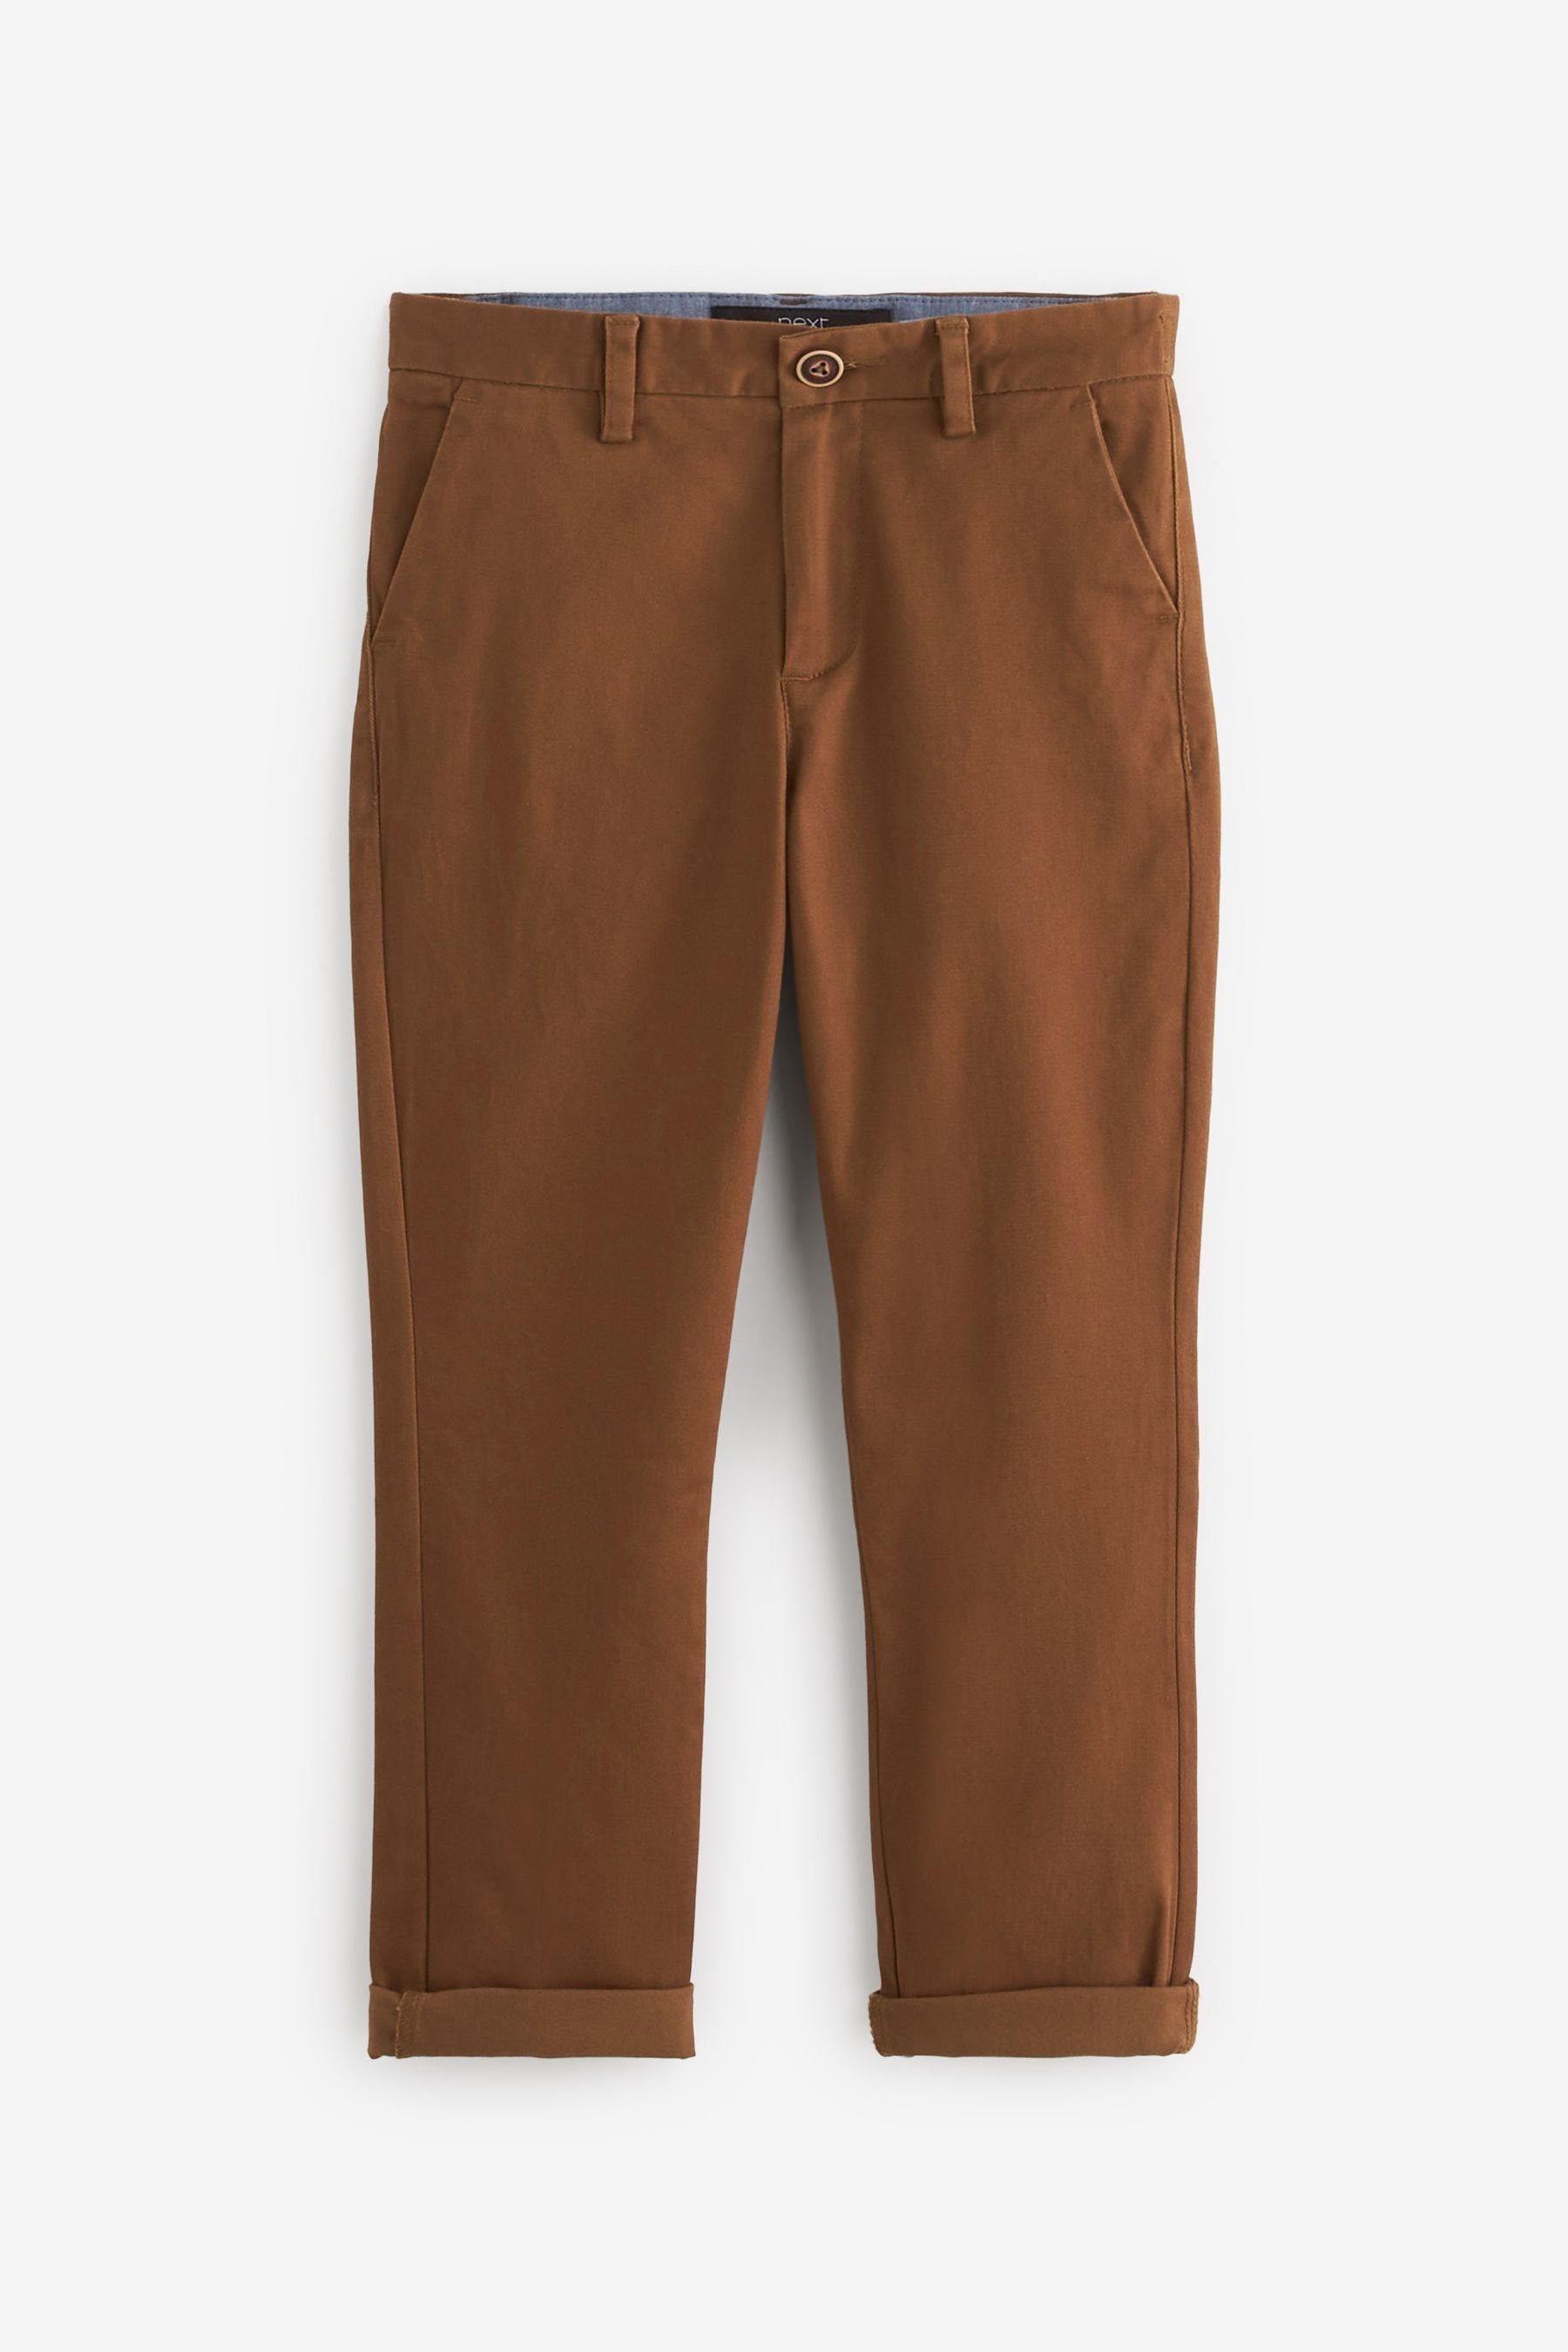 Ginger/Tan mit Stretch Chinohose Chinohose (1-tlg) Brown Next